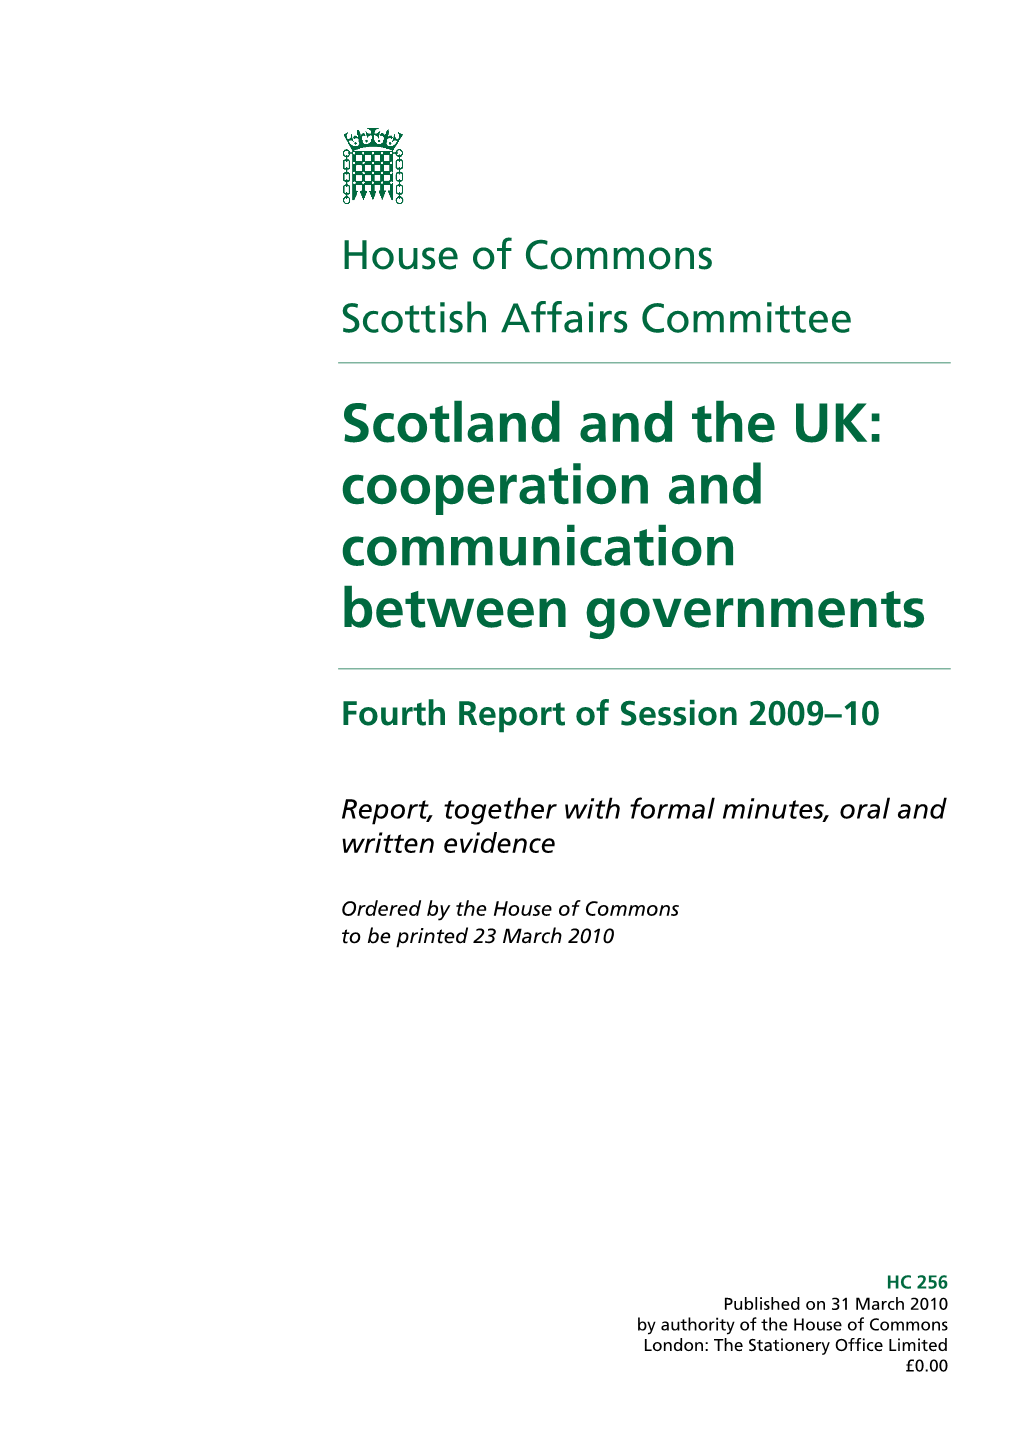 Scotland and the UK: Cooperation and Communication Between Governments